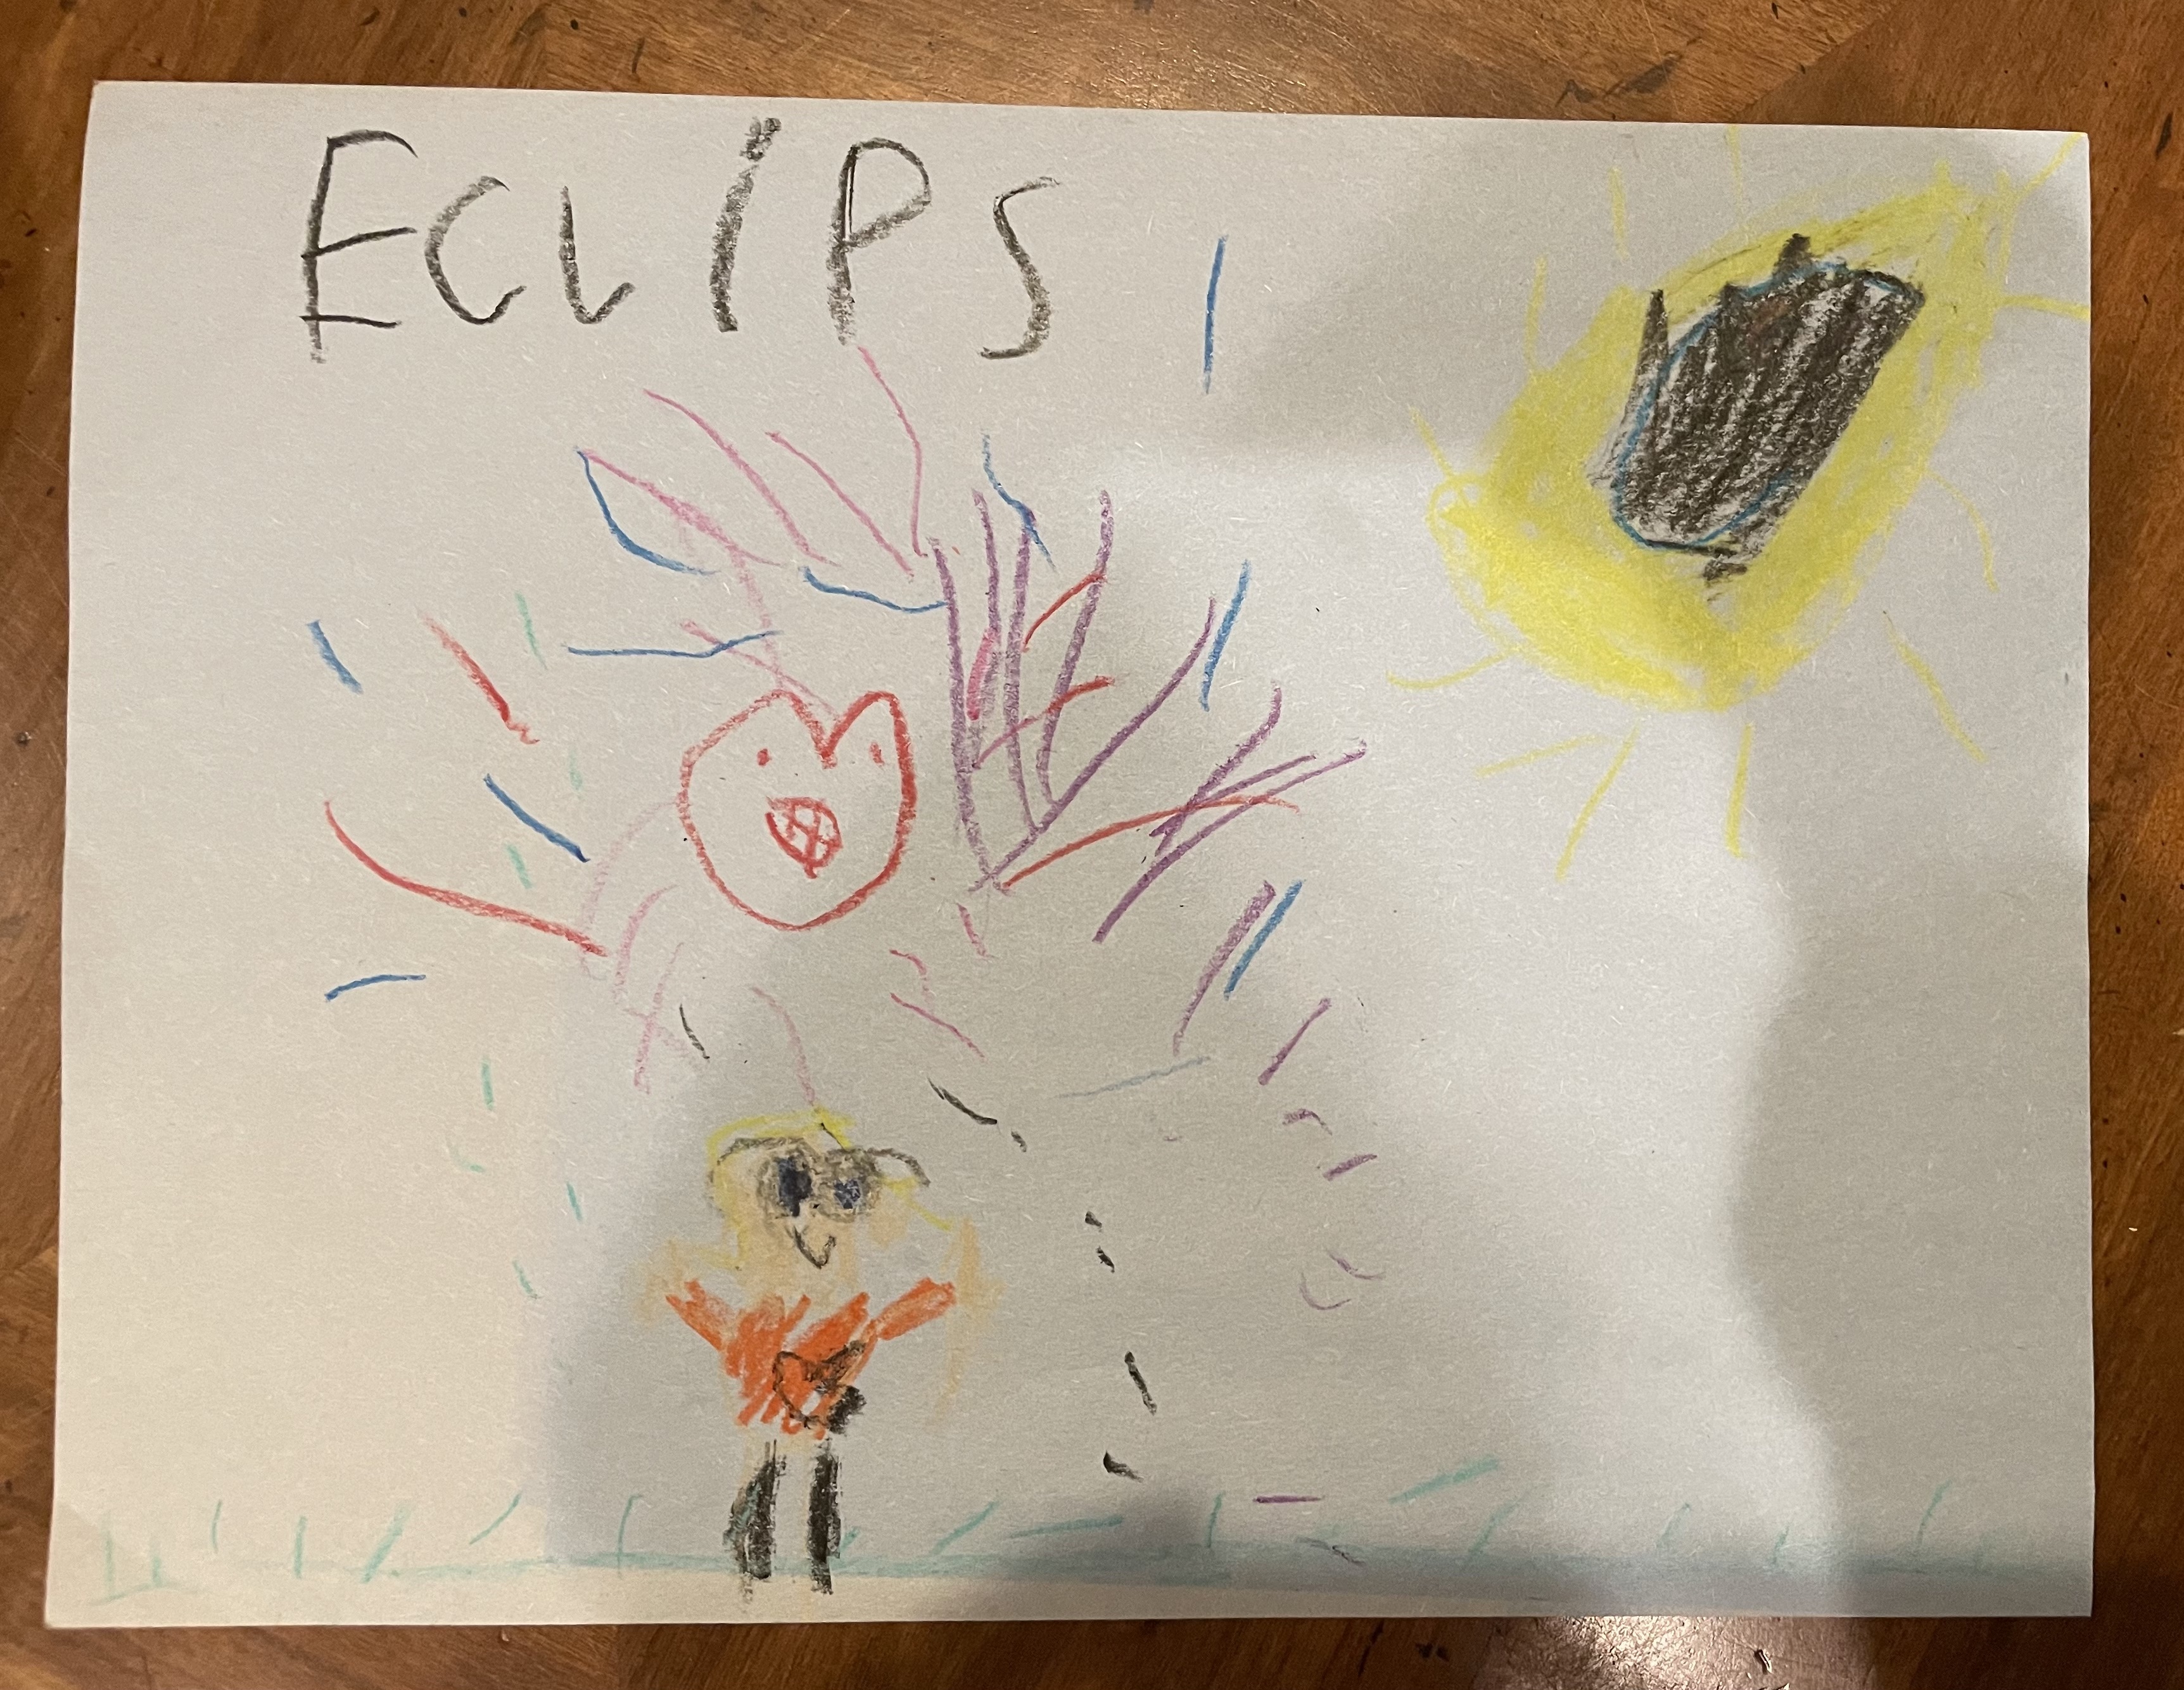 A child’s drawing of the eclipse shows the eclipsed Sun, a child wearing solar viewing glasses and a happy heart surrounded by fireworks.